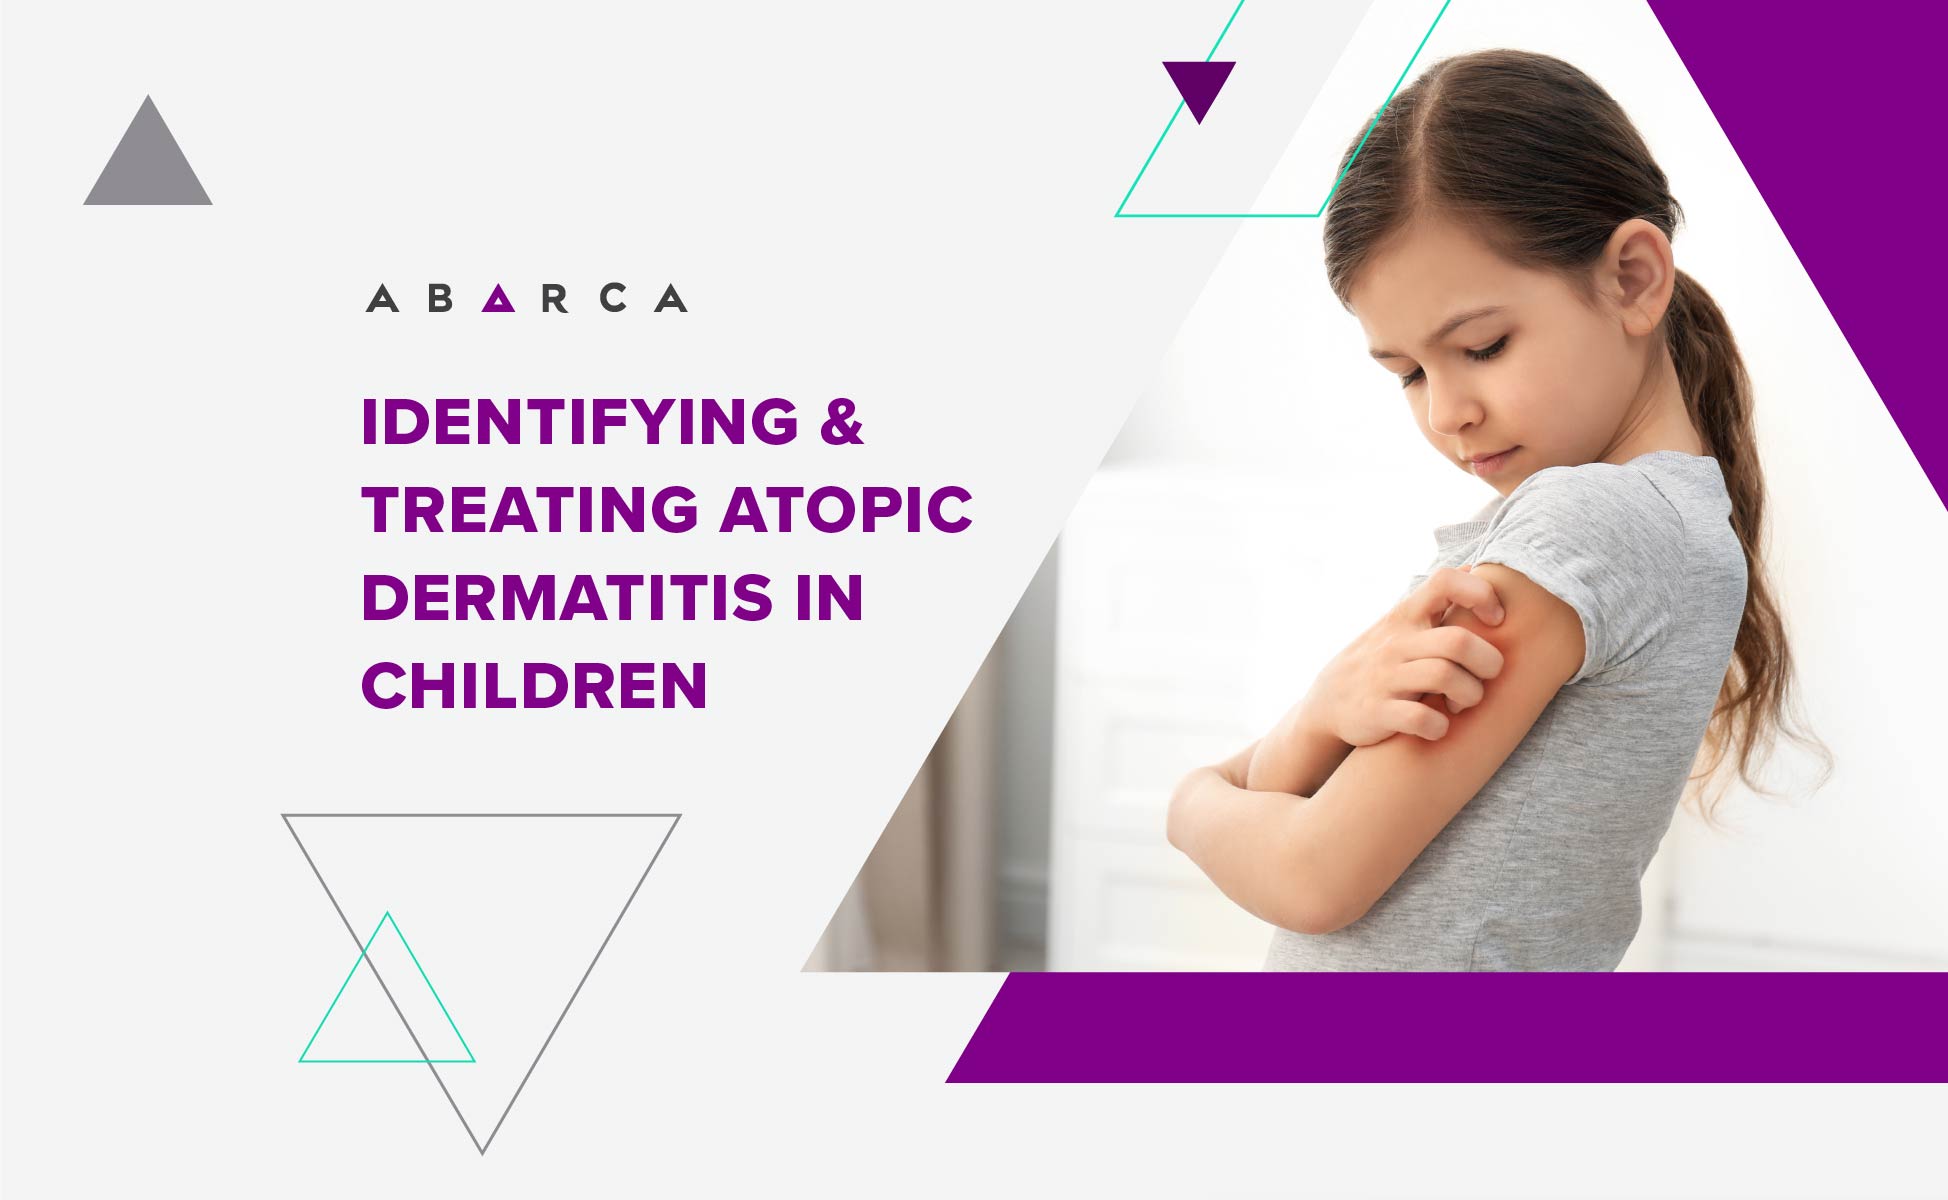 Abarca Health: Identifying and treating atopic dermatitis in children